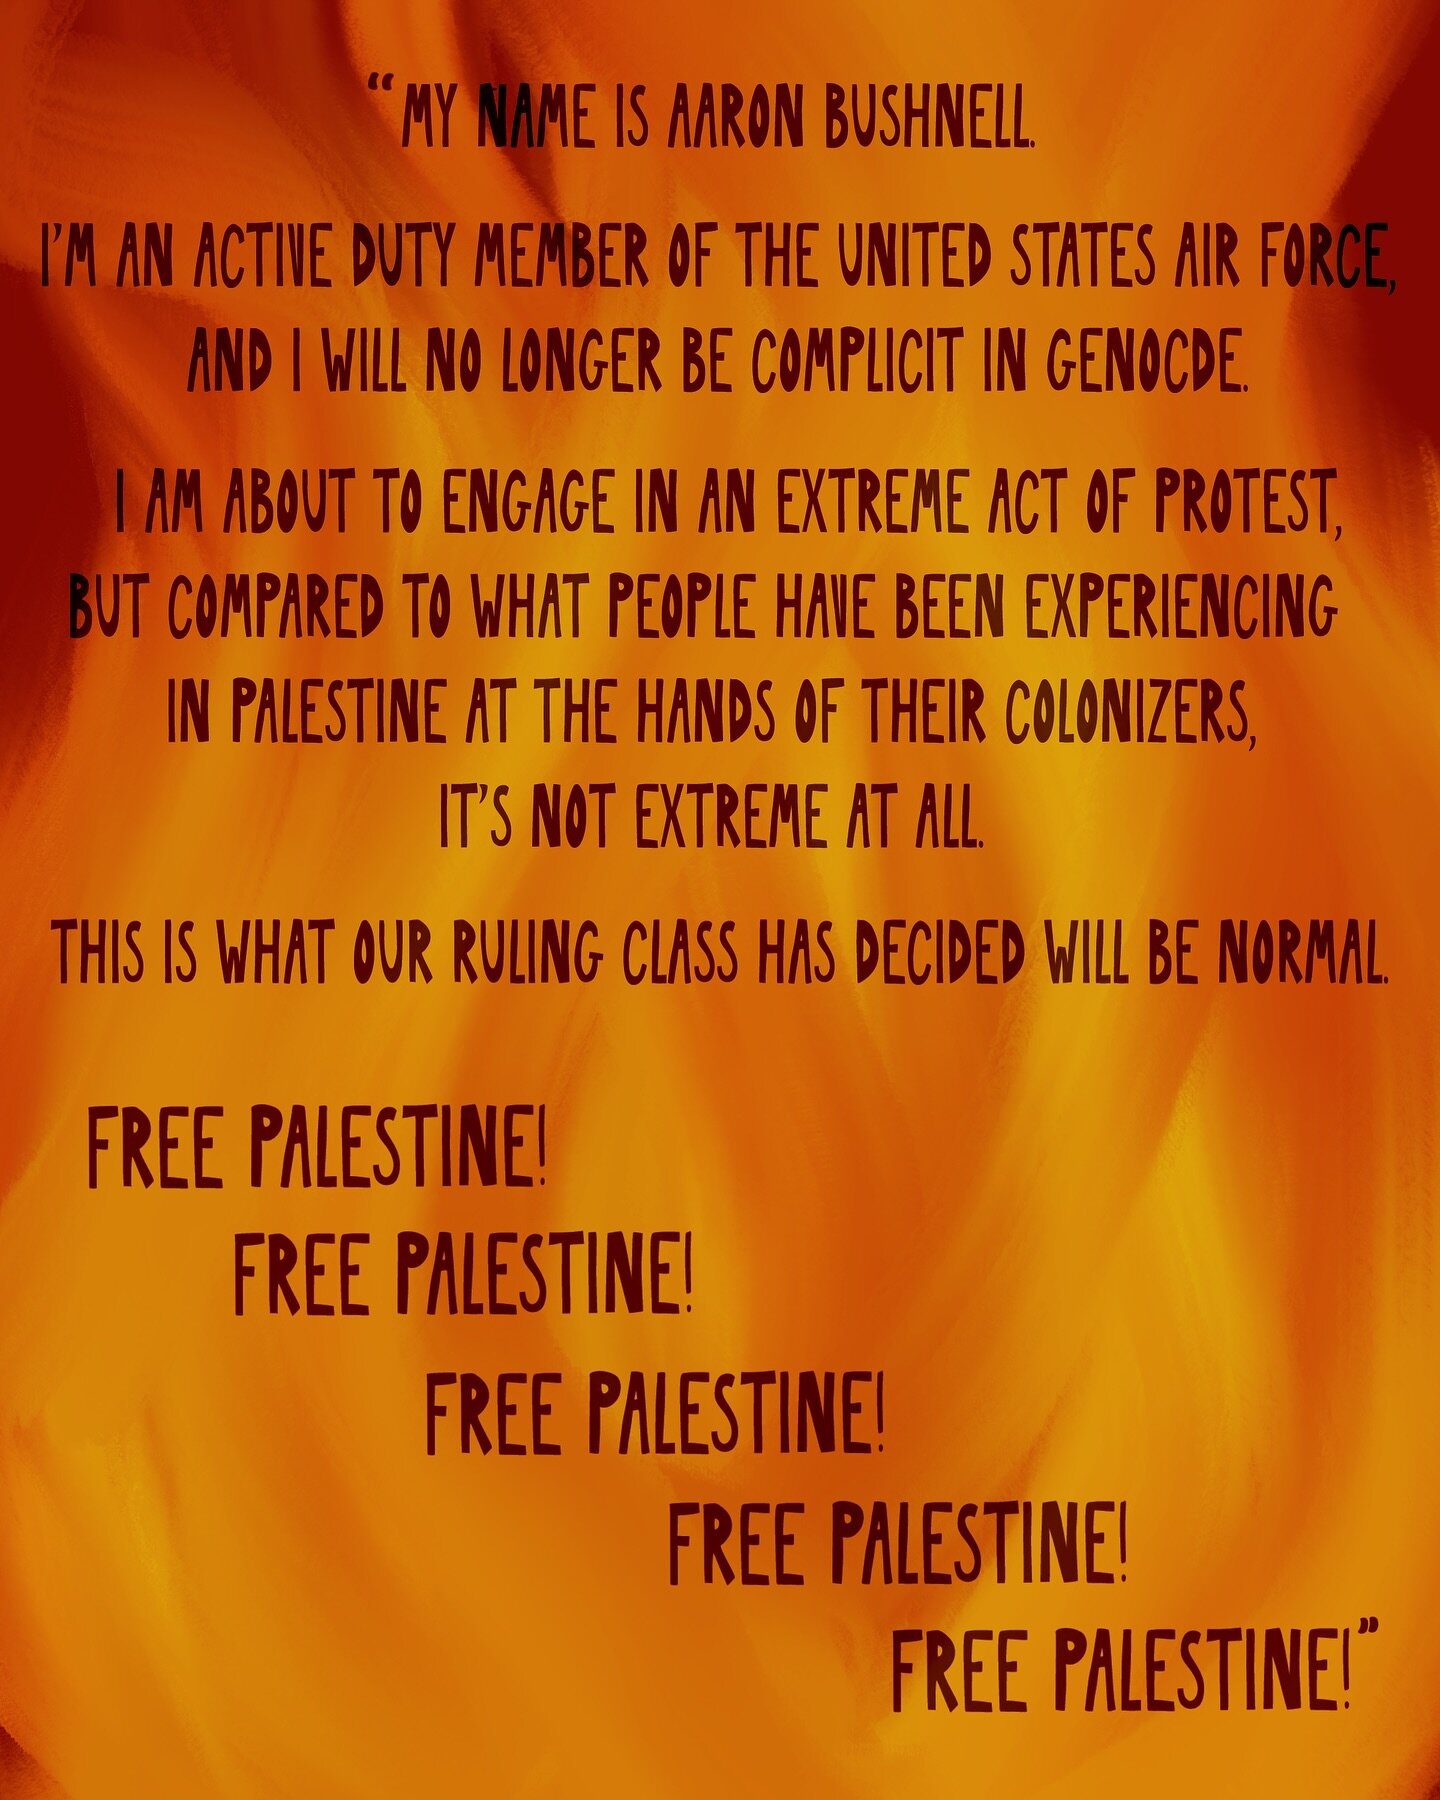 On Sunday, February 25th, Aaron Bushnell self-immolated in front of the Israeli embassy in Washington, DC. Bushnell was an active duty member of the United States Air Force. These were his final words, recorded in a stream he set up to record his pro